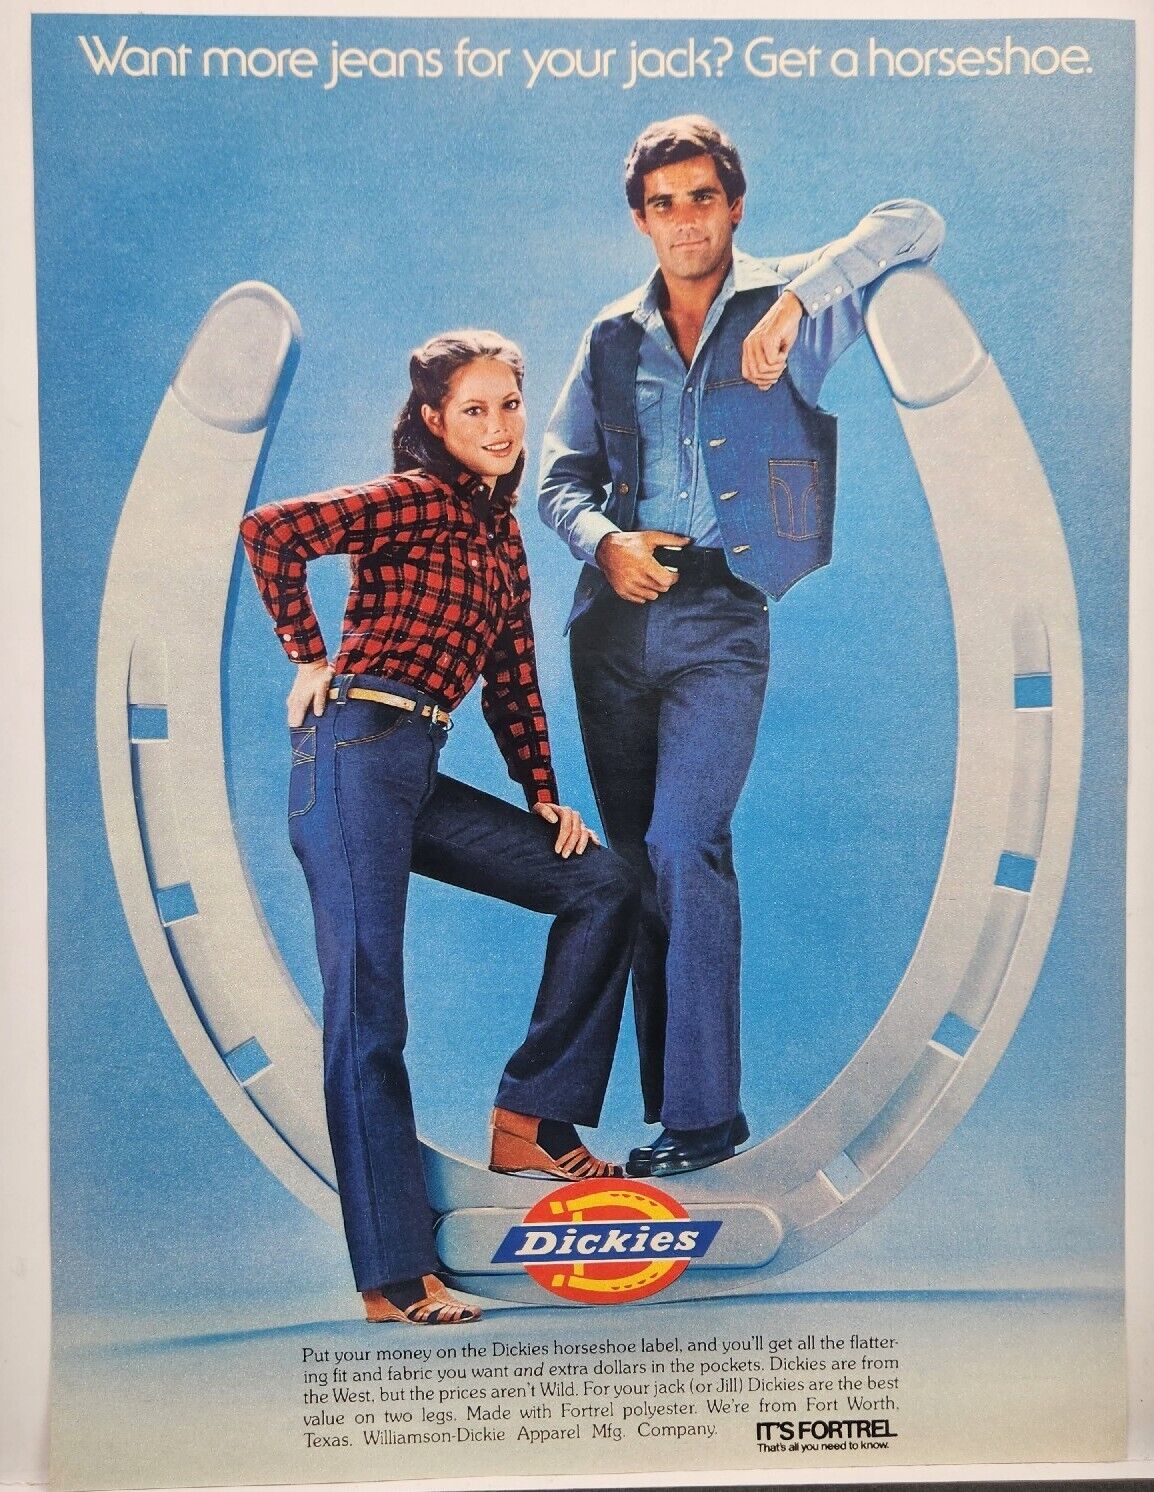 1979 Dickies Jeans Want More Jeans For Jock? Get A Horseshoe Vintage Print Ad